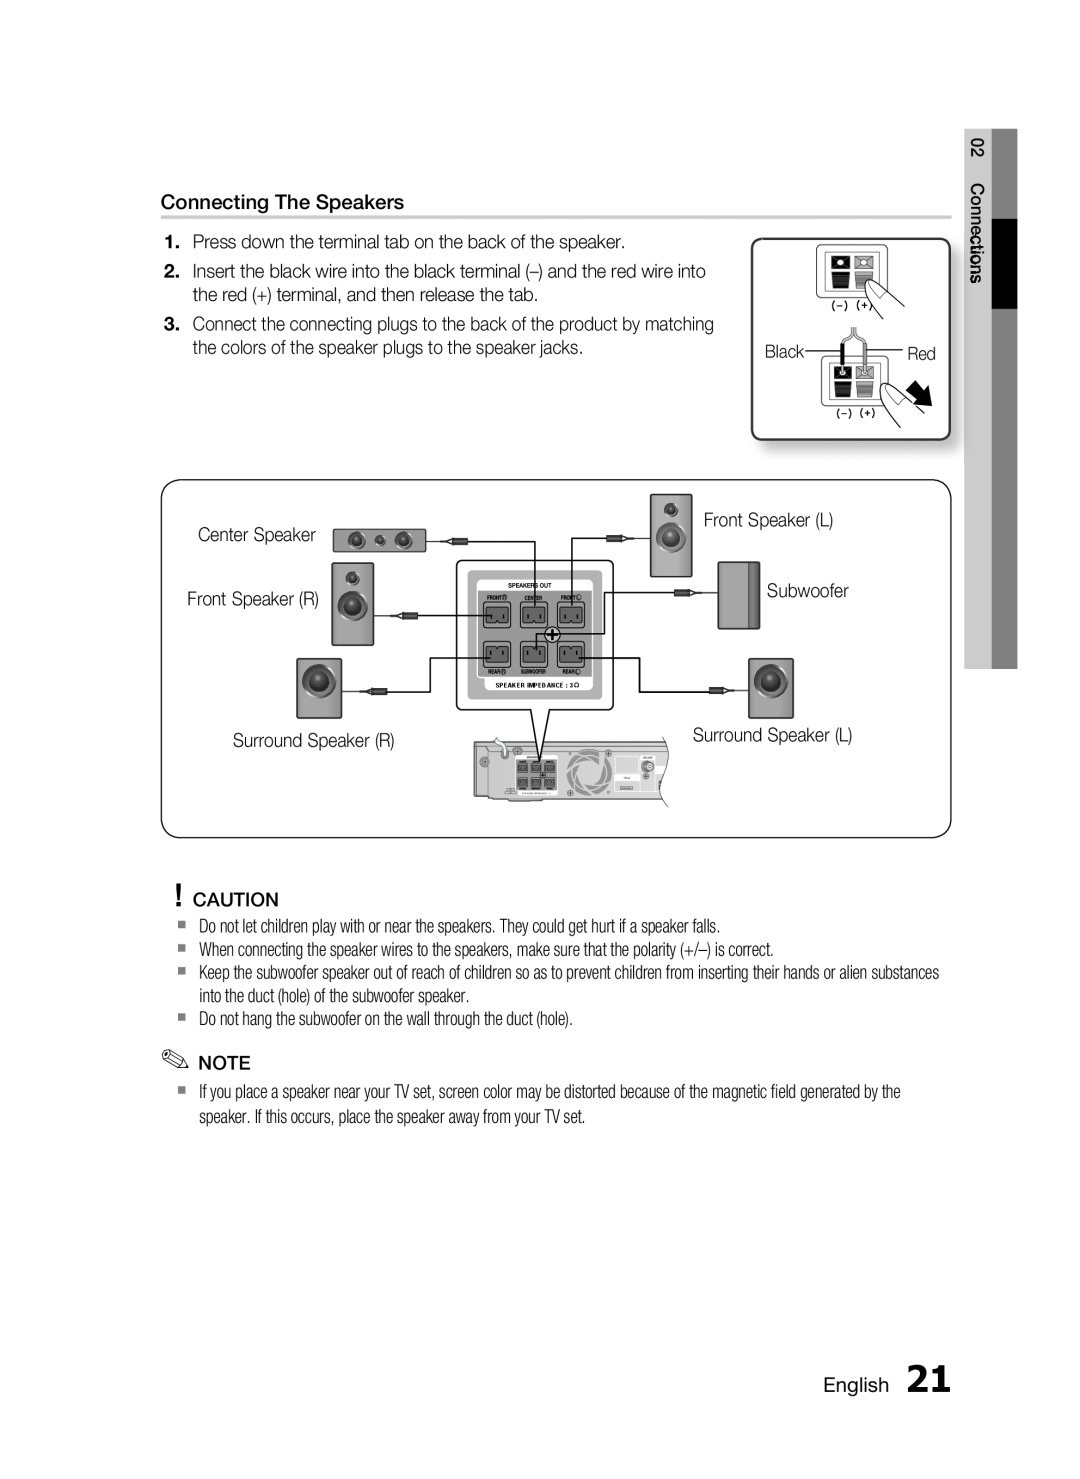 Samsung C6600 user manual Connecting The Speakers, English 